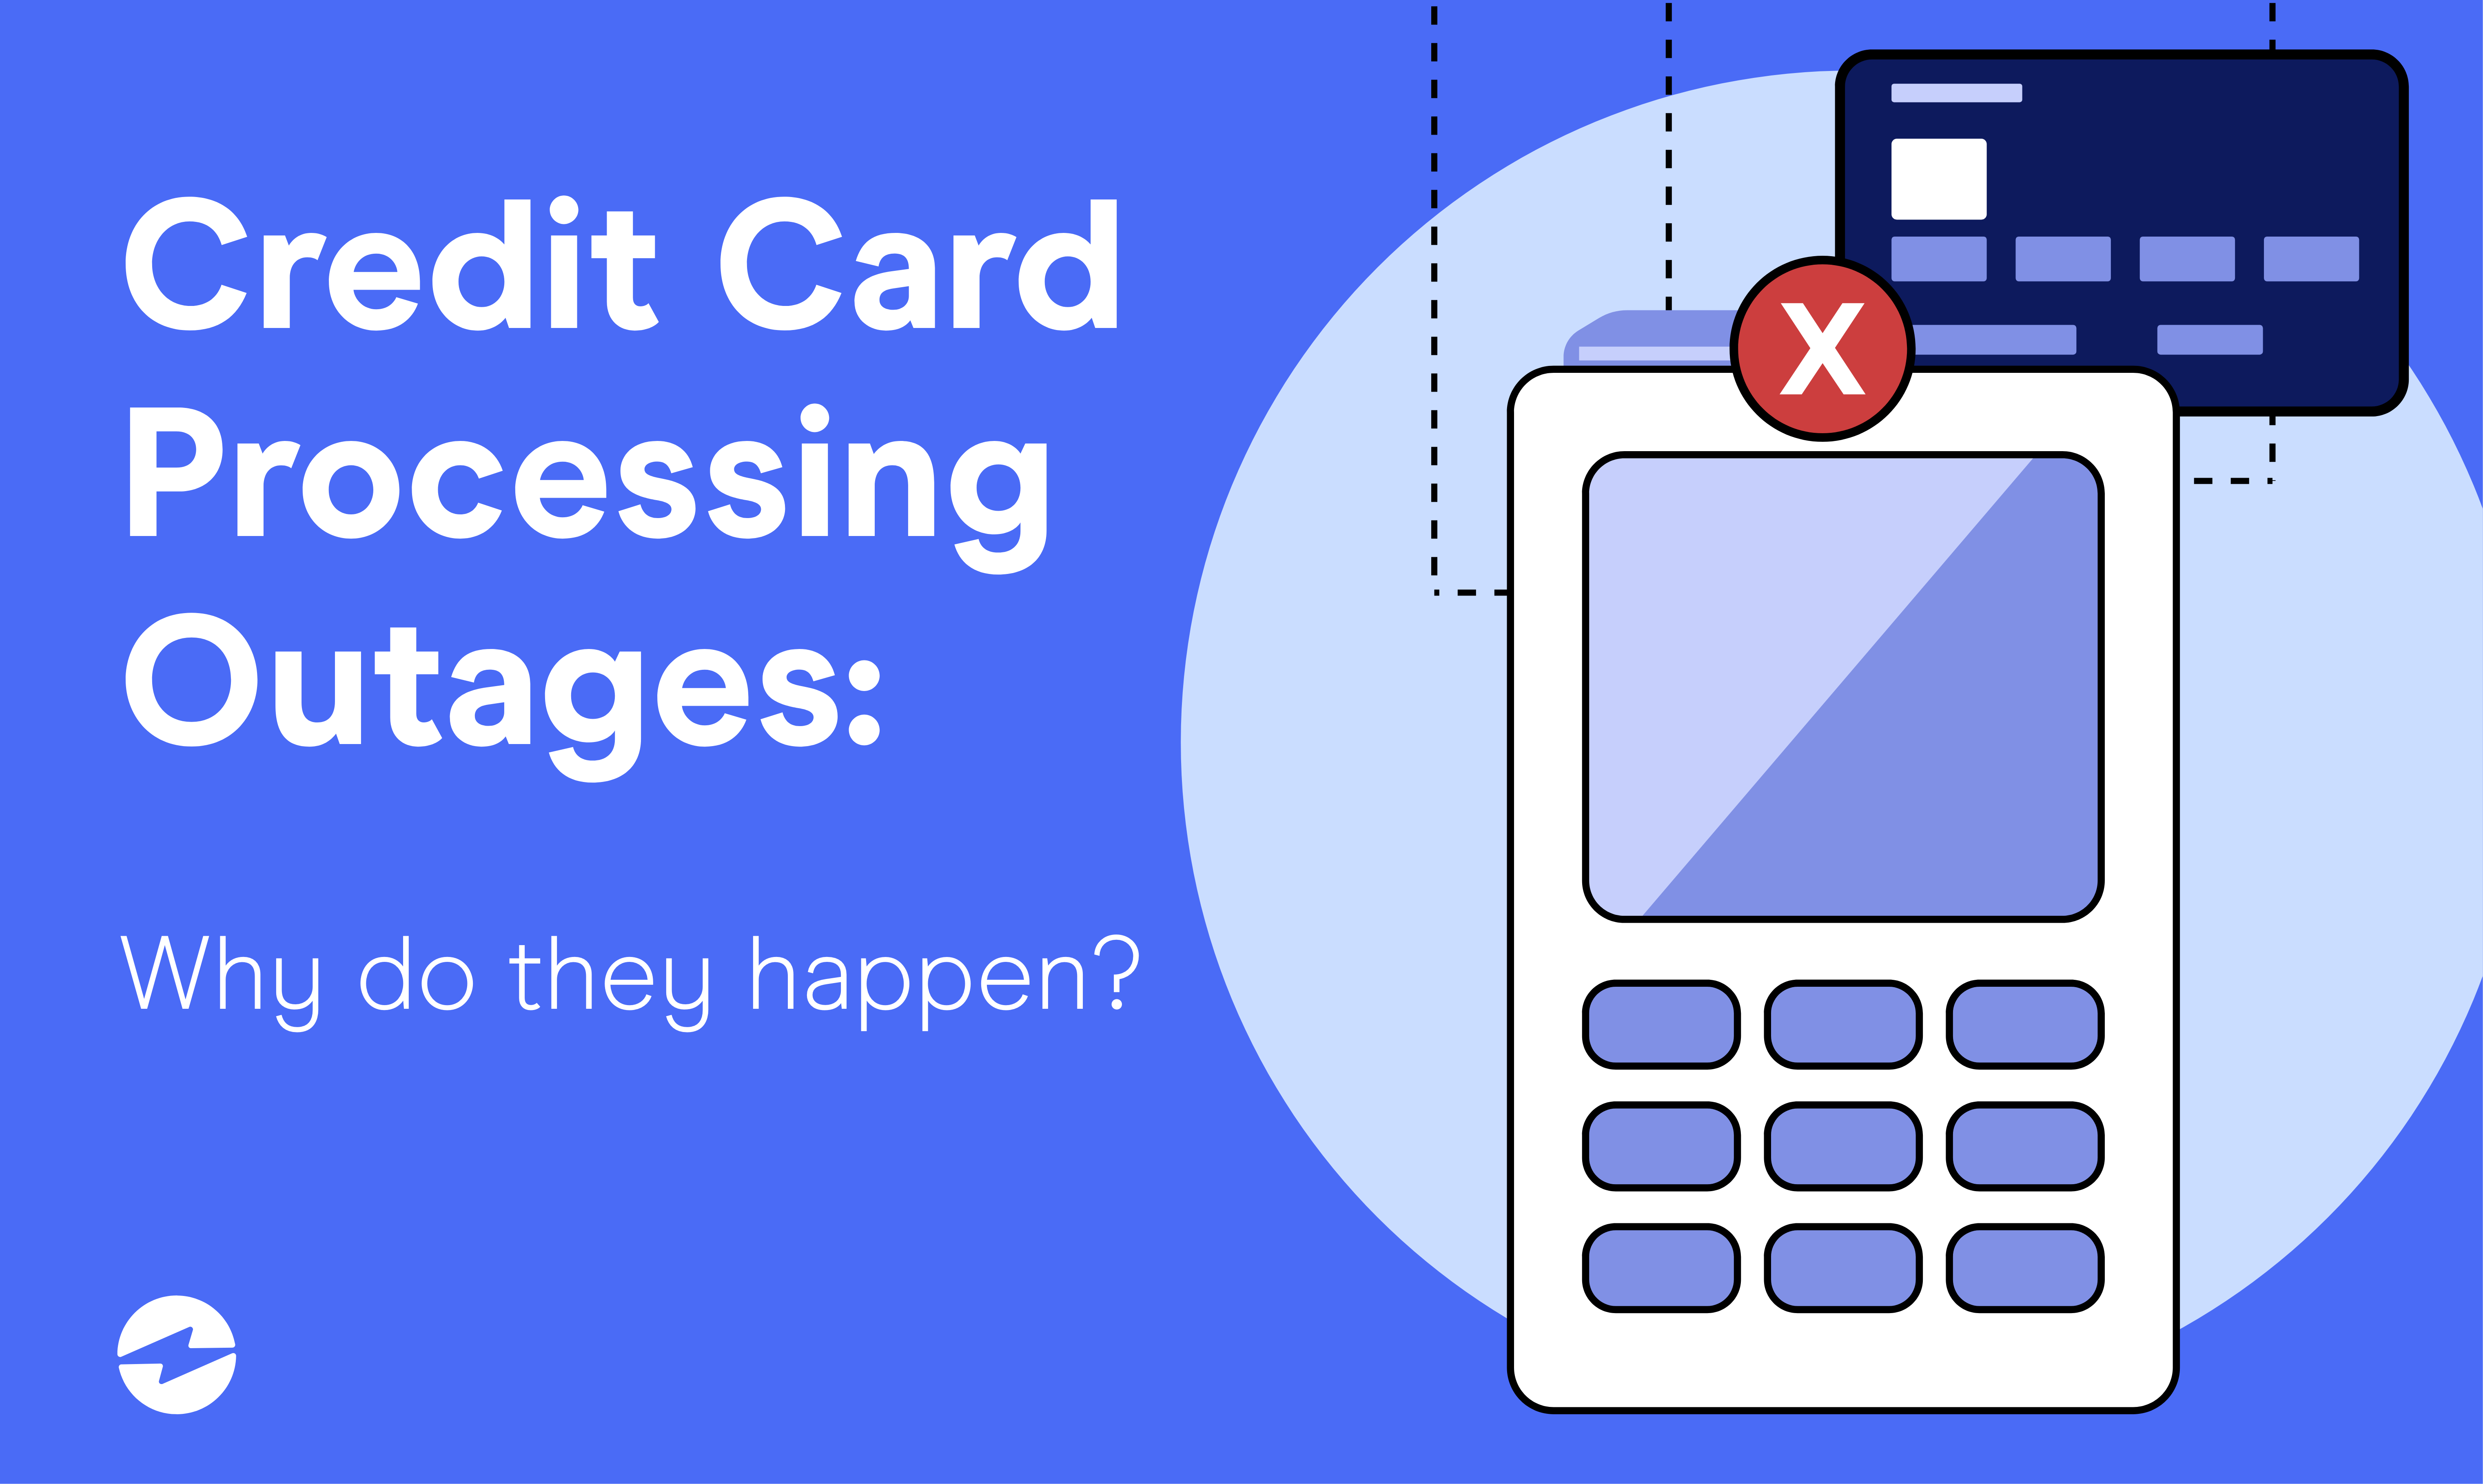 Credit Card Processing Outages